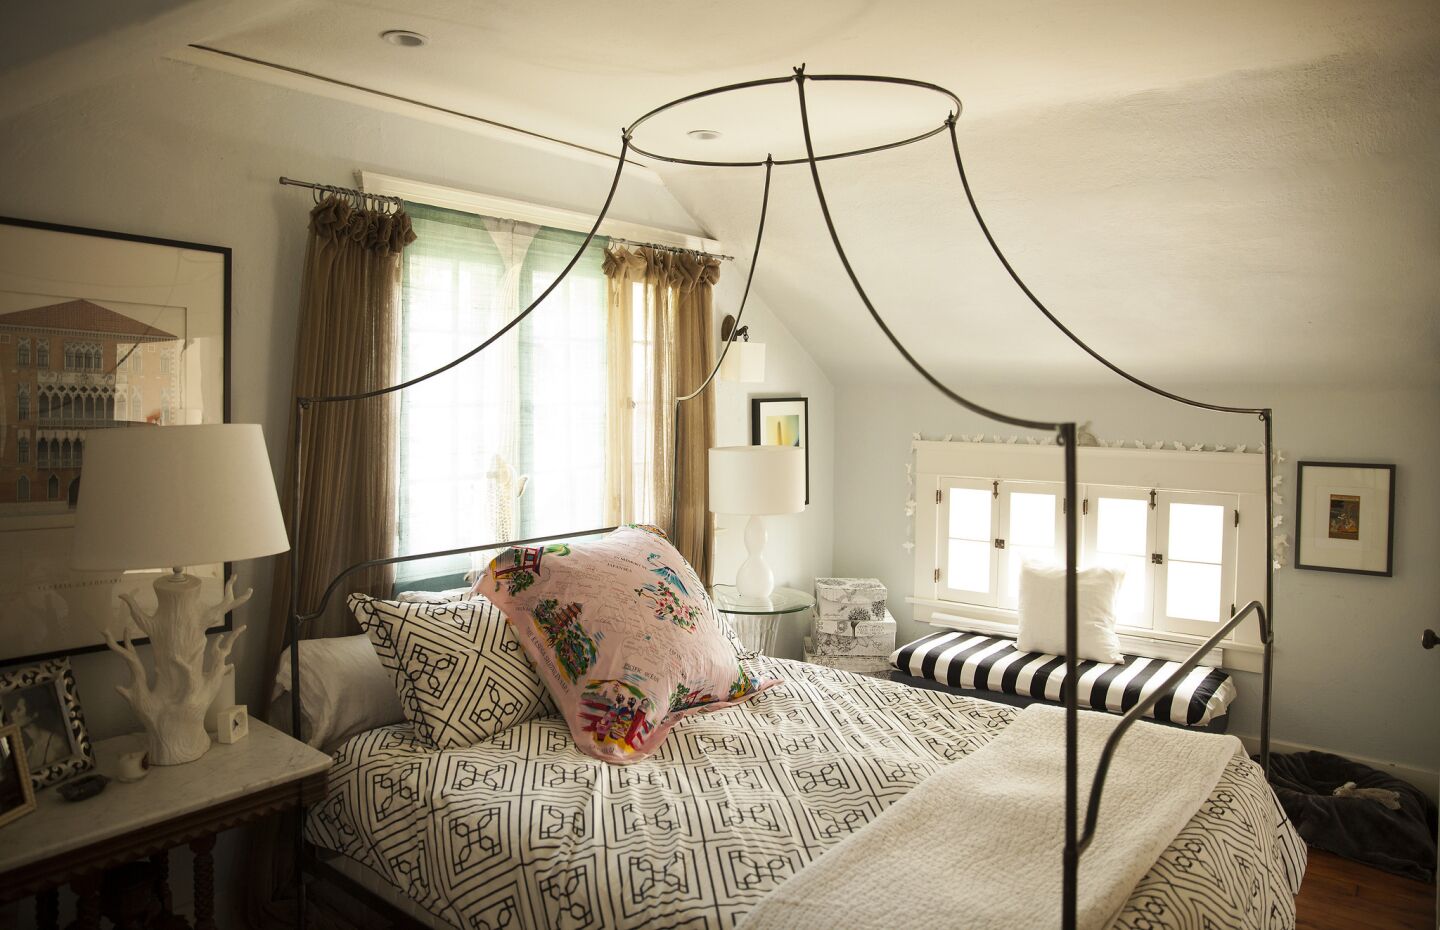 In the bedroom, the roofline and period windows hint at the Garvanza home's Victorian roots.